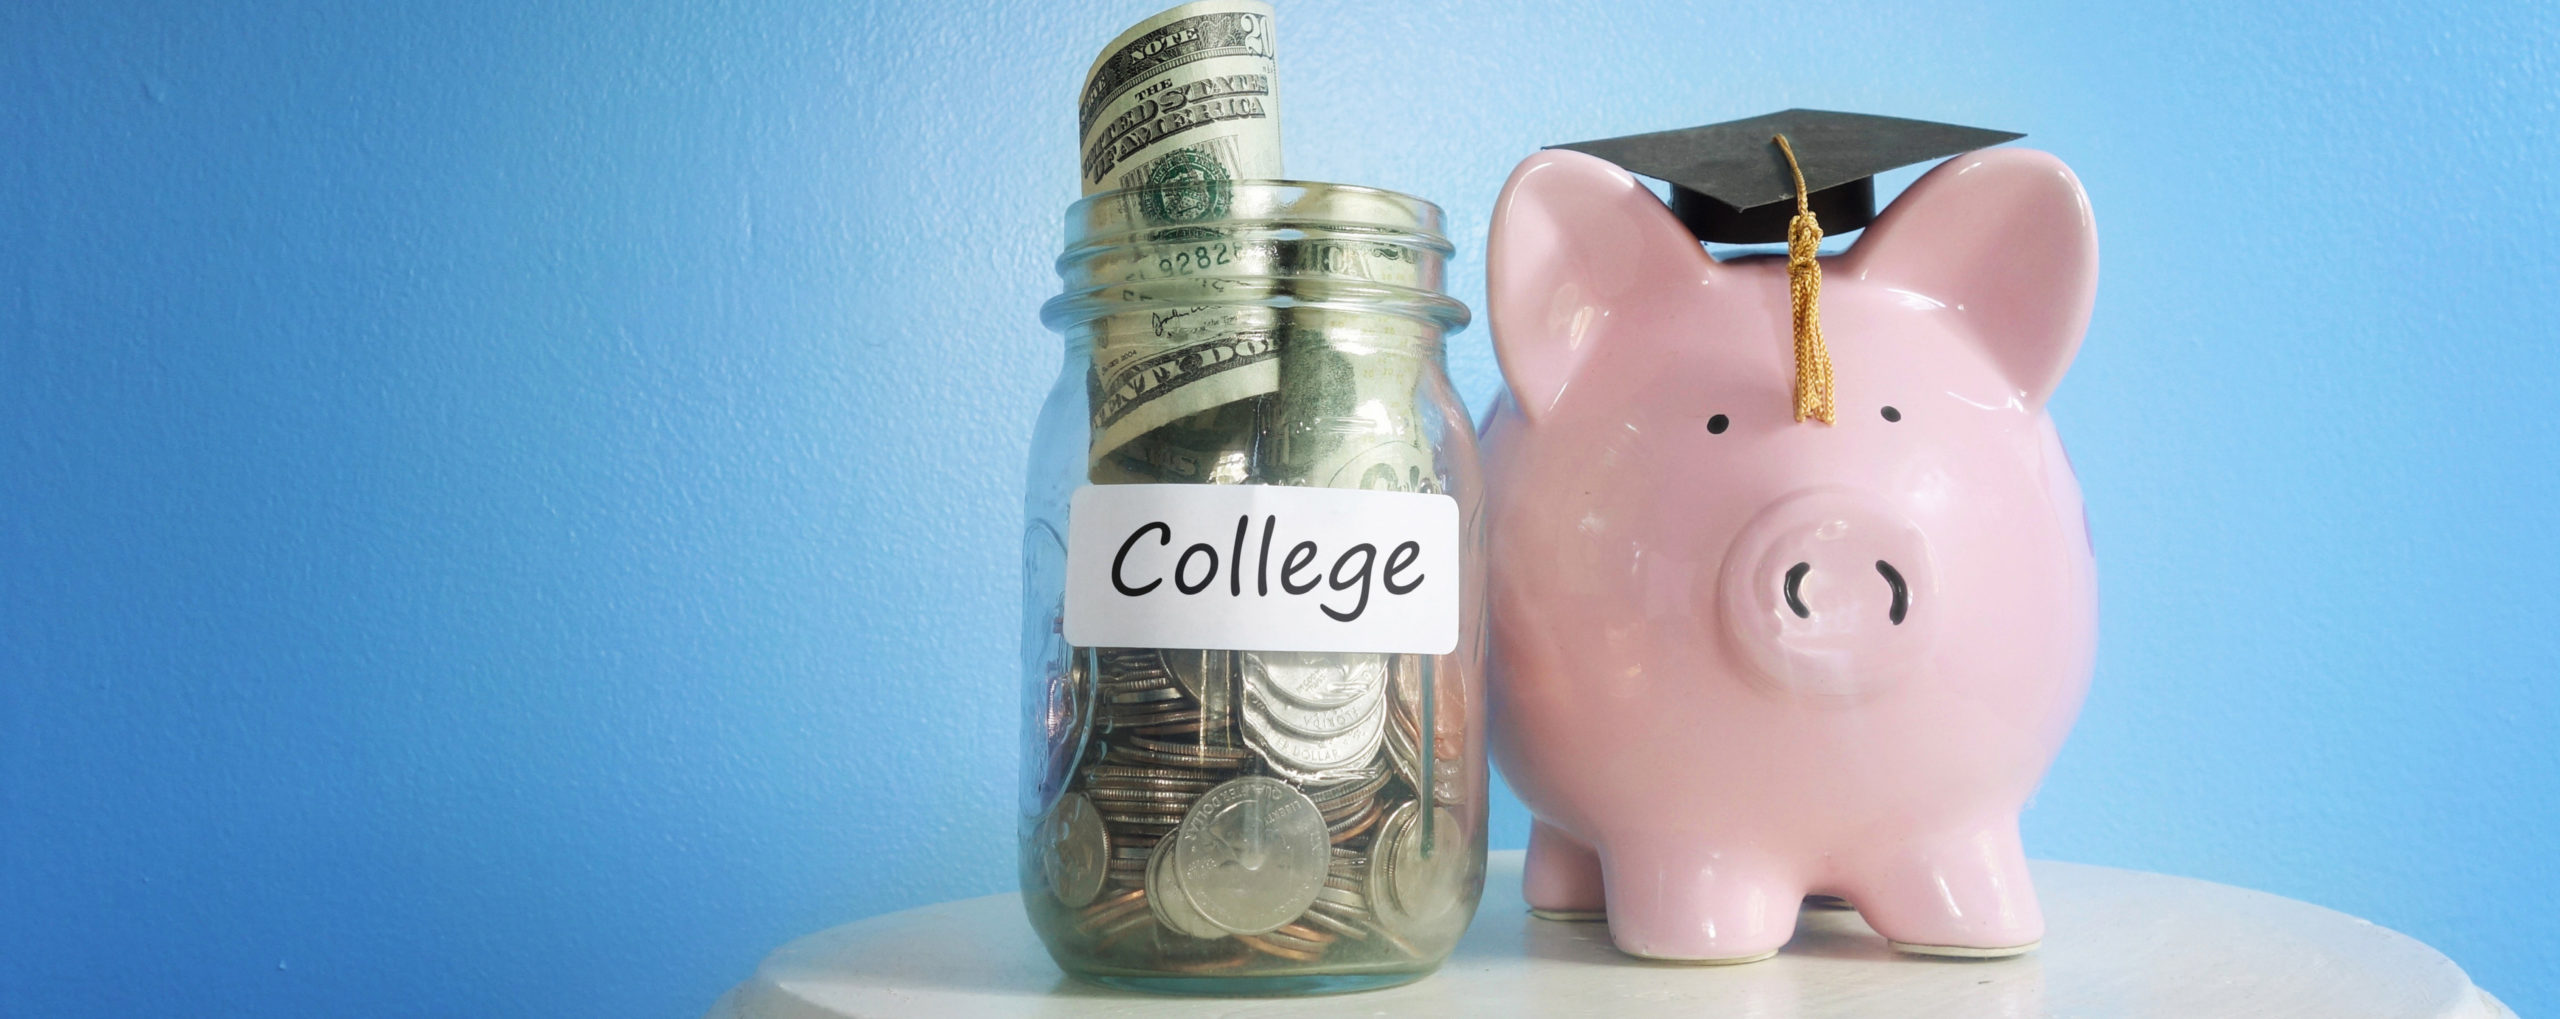 Finding The Right College Starts With Finding The Right College Fund